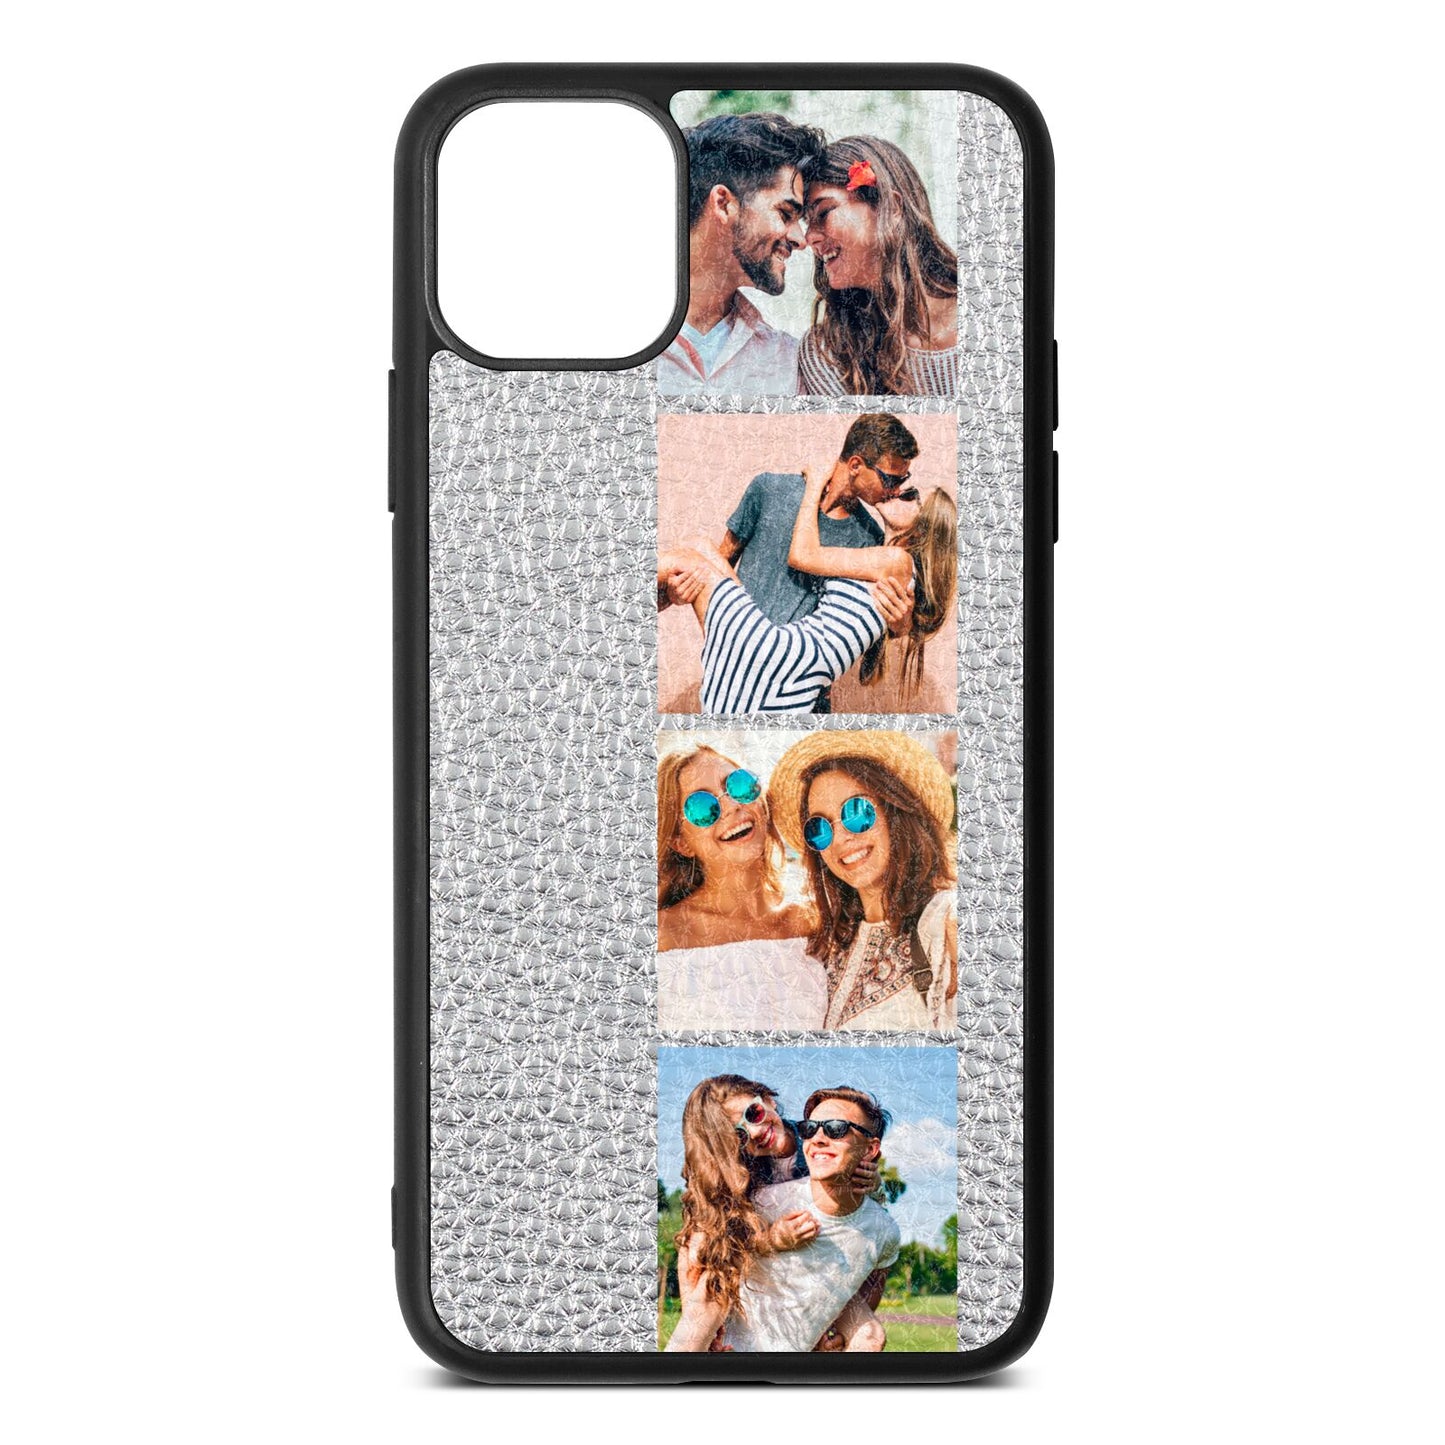 Photo Strip Montage Upload Silver Pebble Leather iPhone 11 Pro Max Case